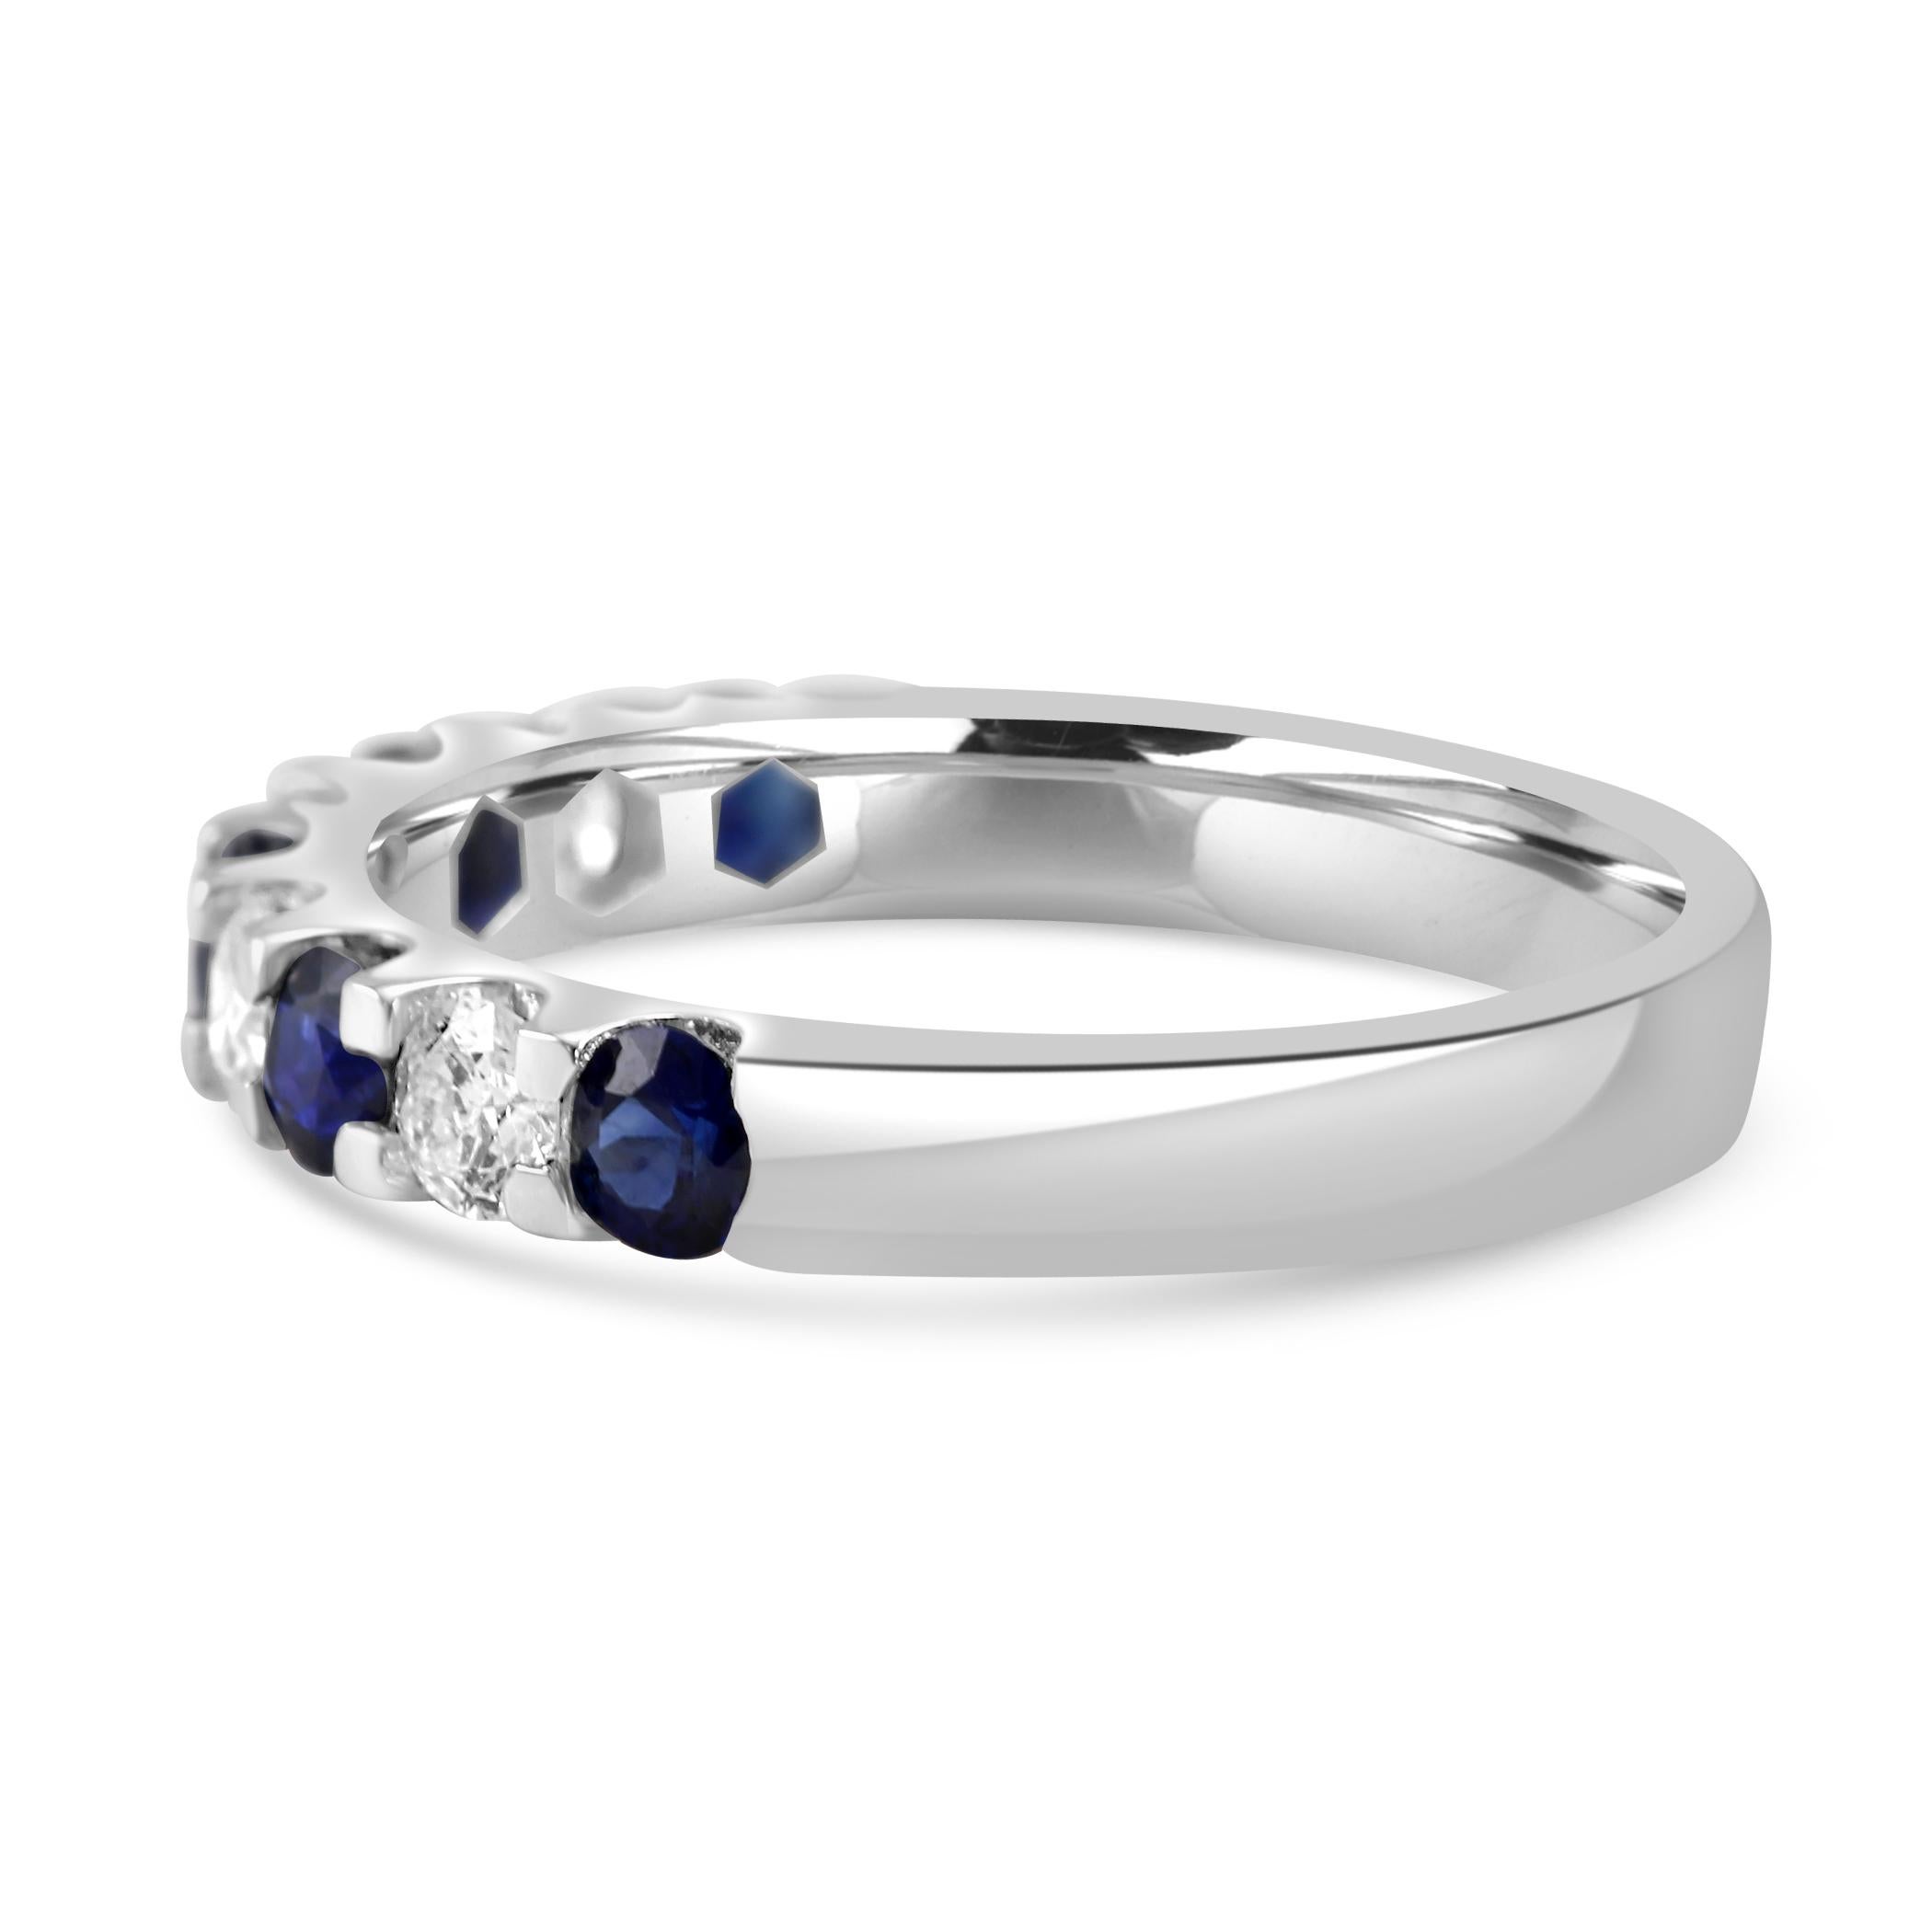 For Sale:  Blue Sapphire White Diamond Round 18K White Gold Fashion Engagement Band Ring 3